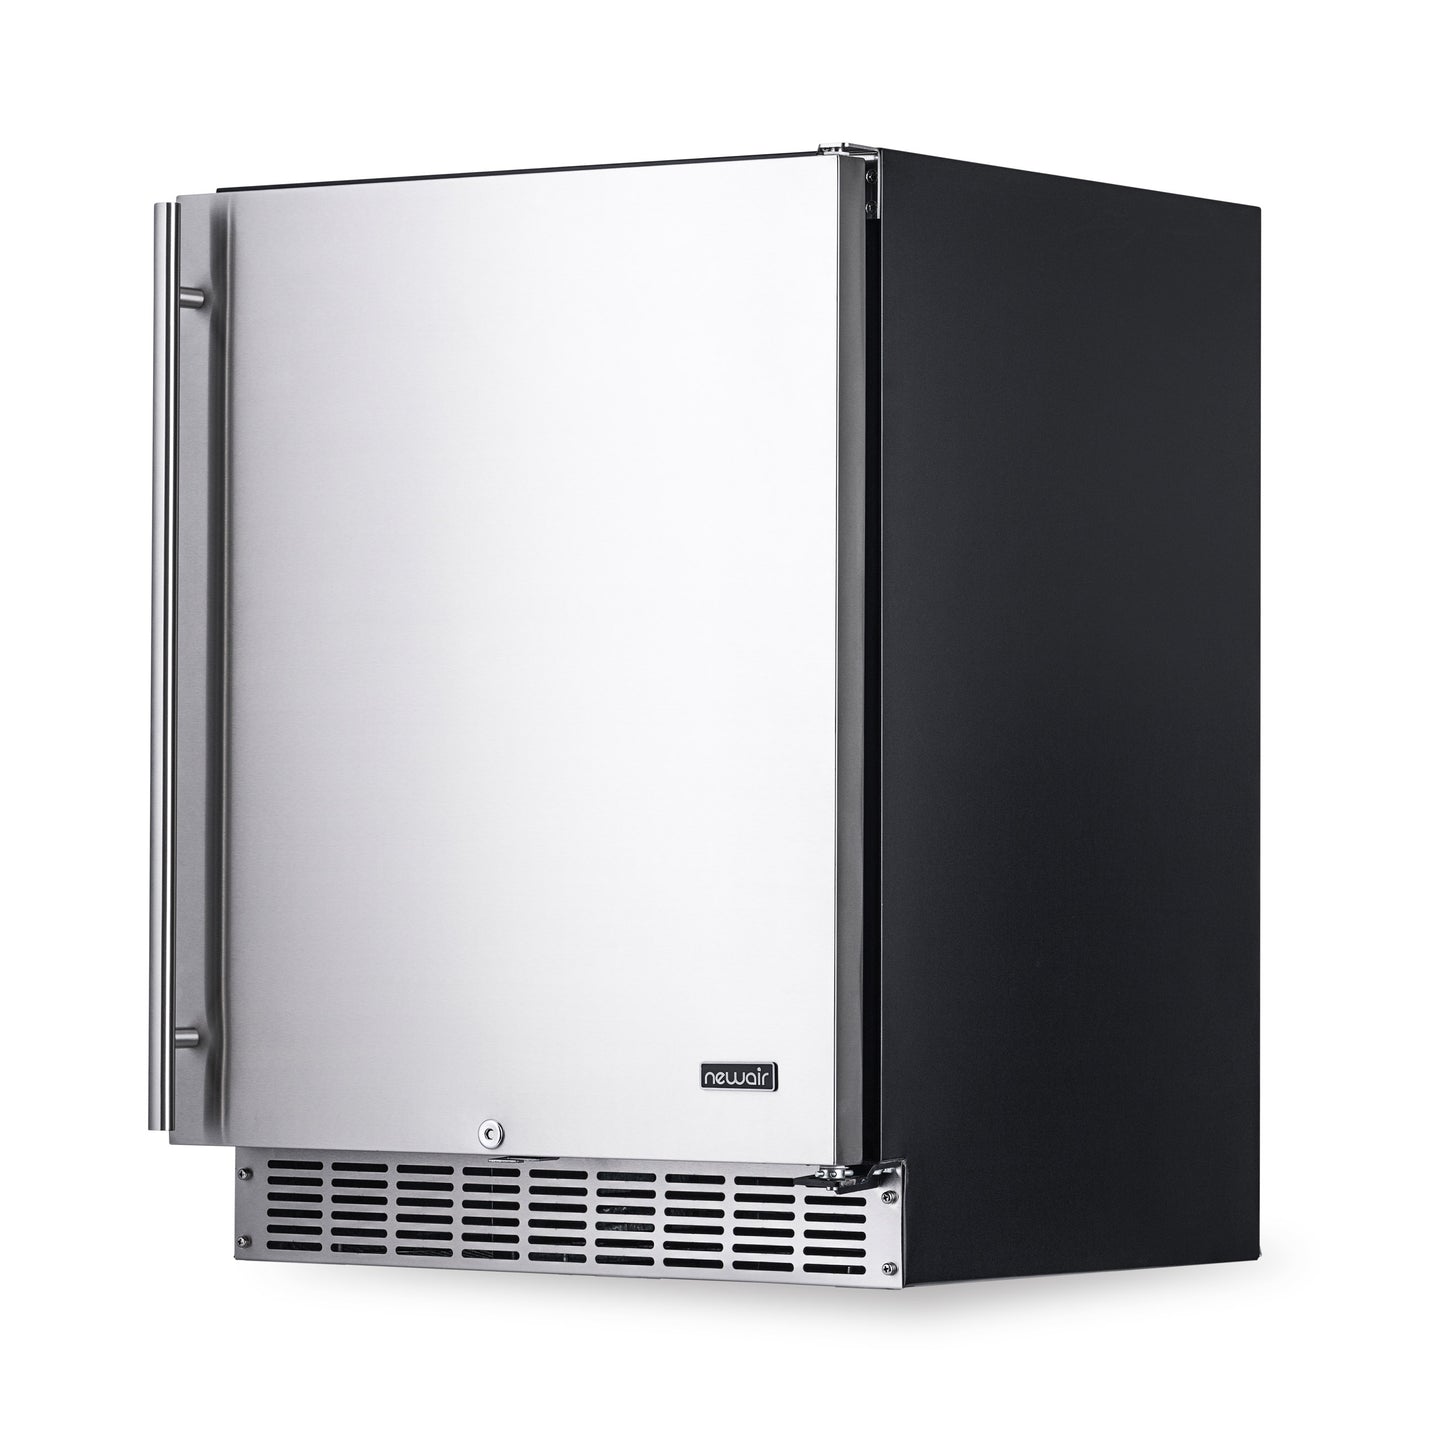 Newair 24” Built-in 160 Can Outdoor Beverage Fridge in Weatherproof Stainless Steel with Auto-Closing Door and Easy Glide Casters NOF160SS00-Beverage Fridges-The Wine Cooler Club